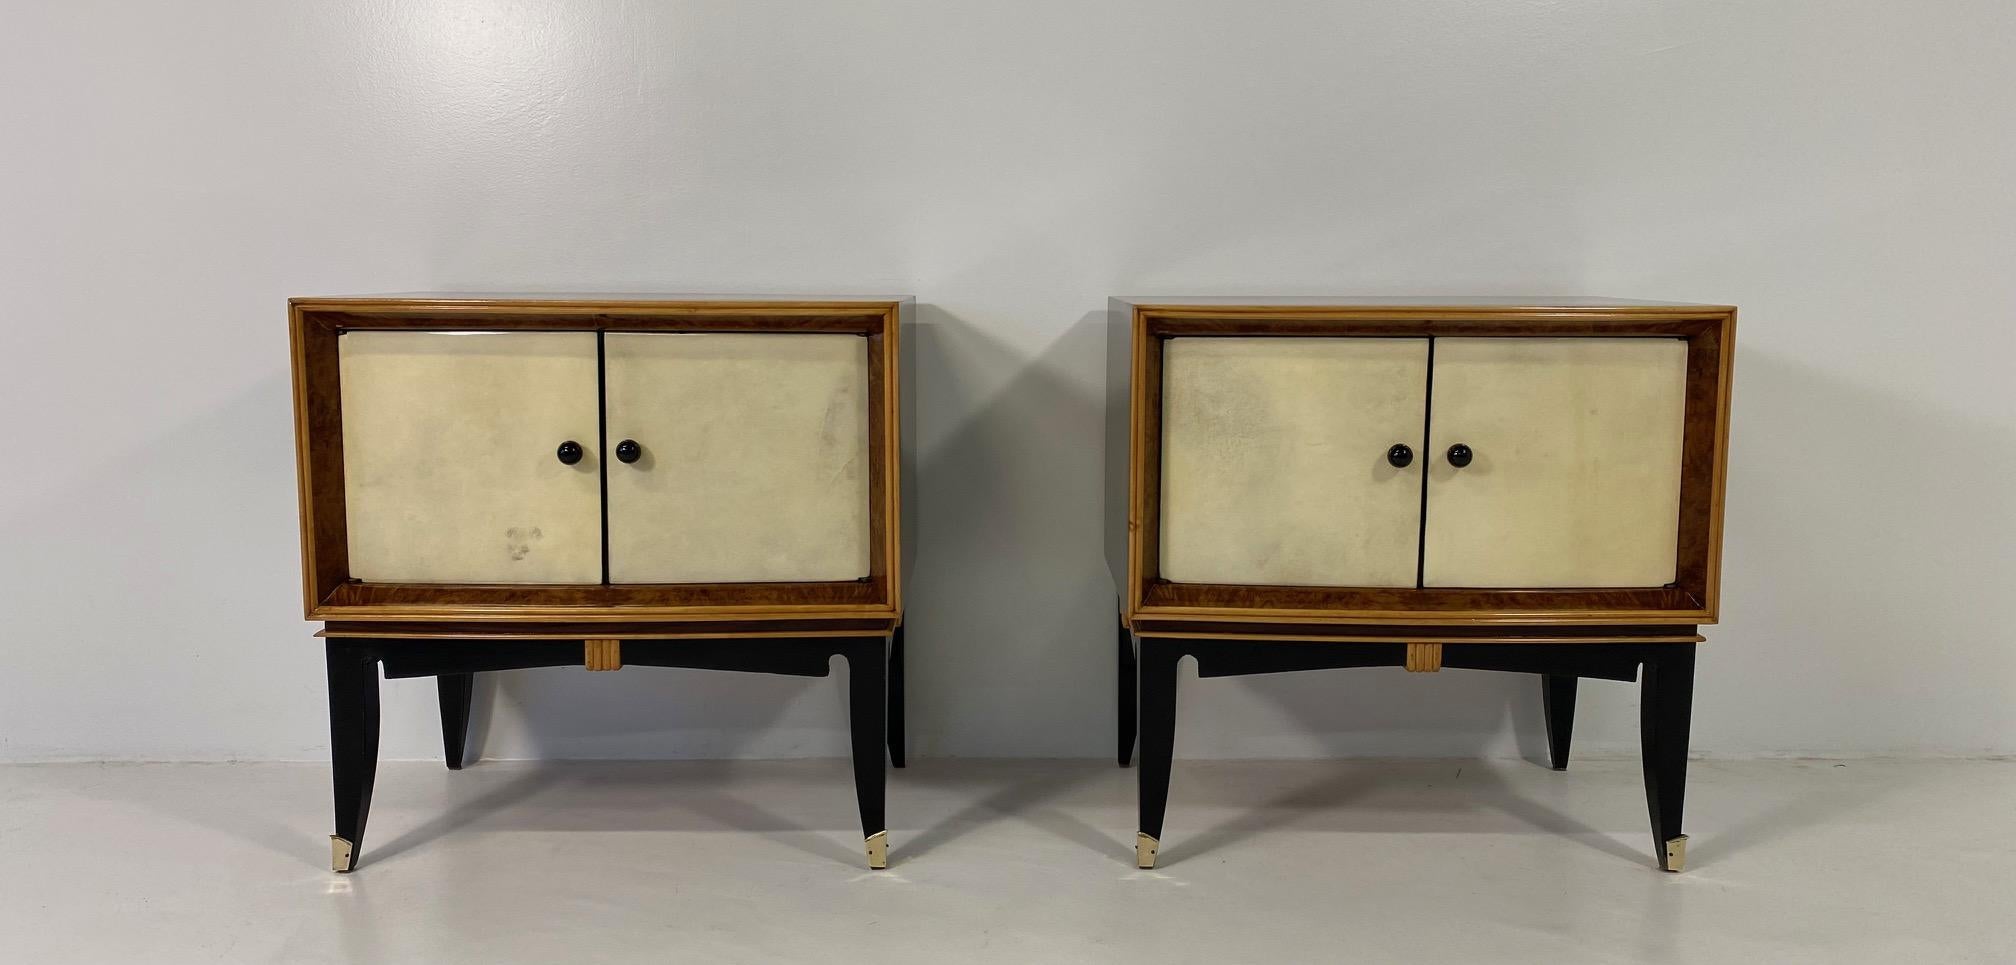 This pair of Art Deco nightstands was produced in Italy in the 1940s.
The two doors are covered in parchment and are framed by a briar walnut profile, which is also framed by a profile in maple. 
Also the profile and the decorations on the black